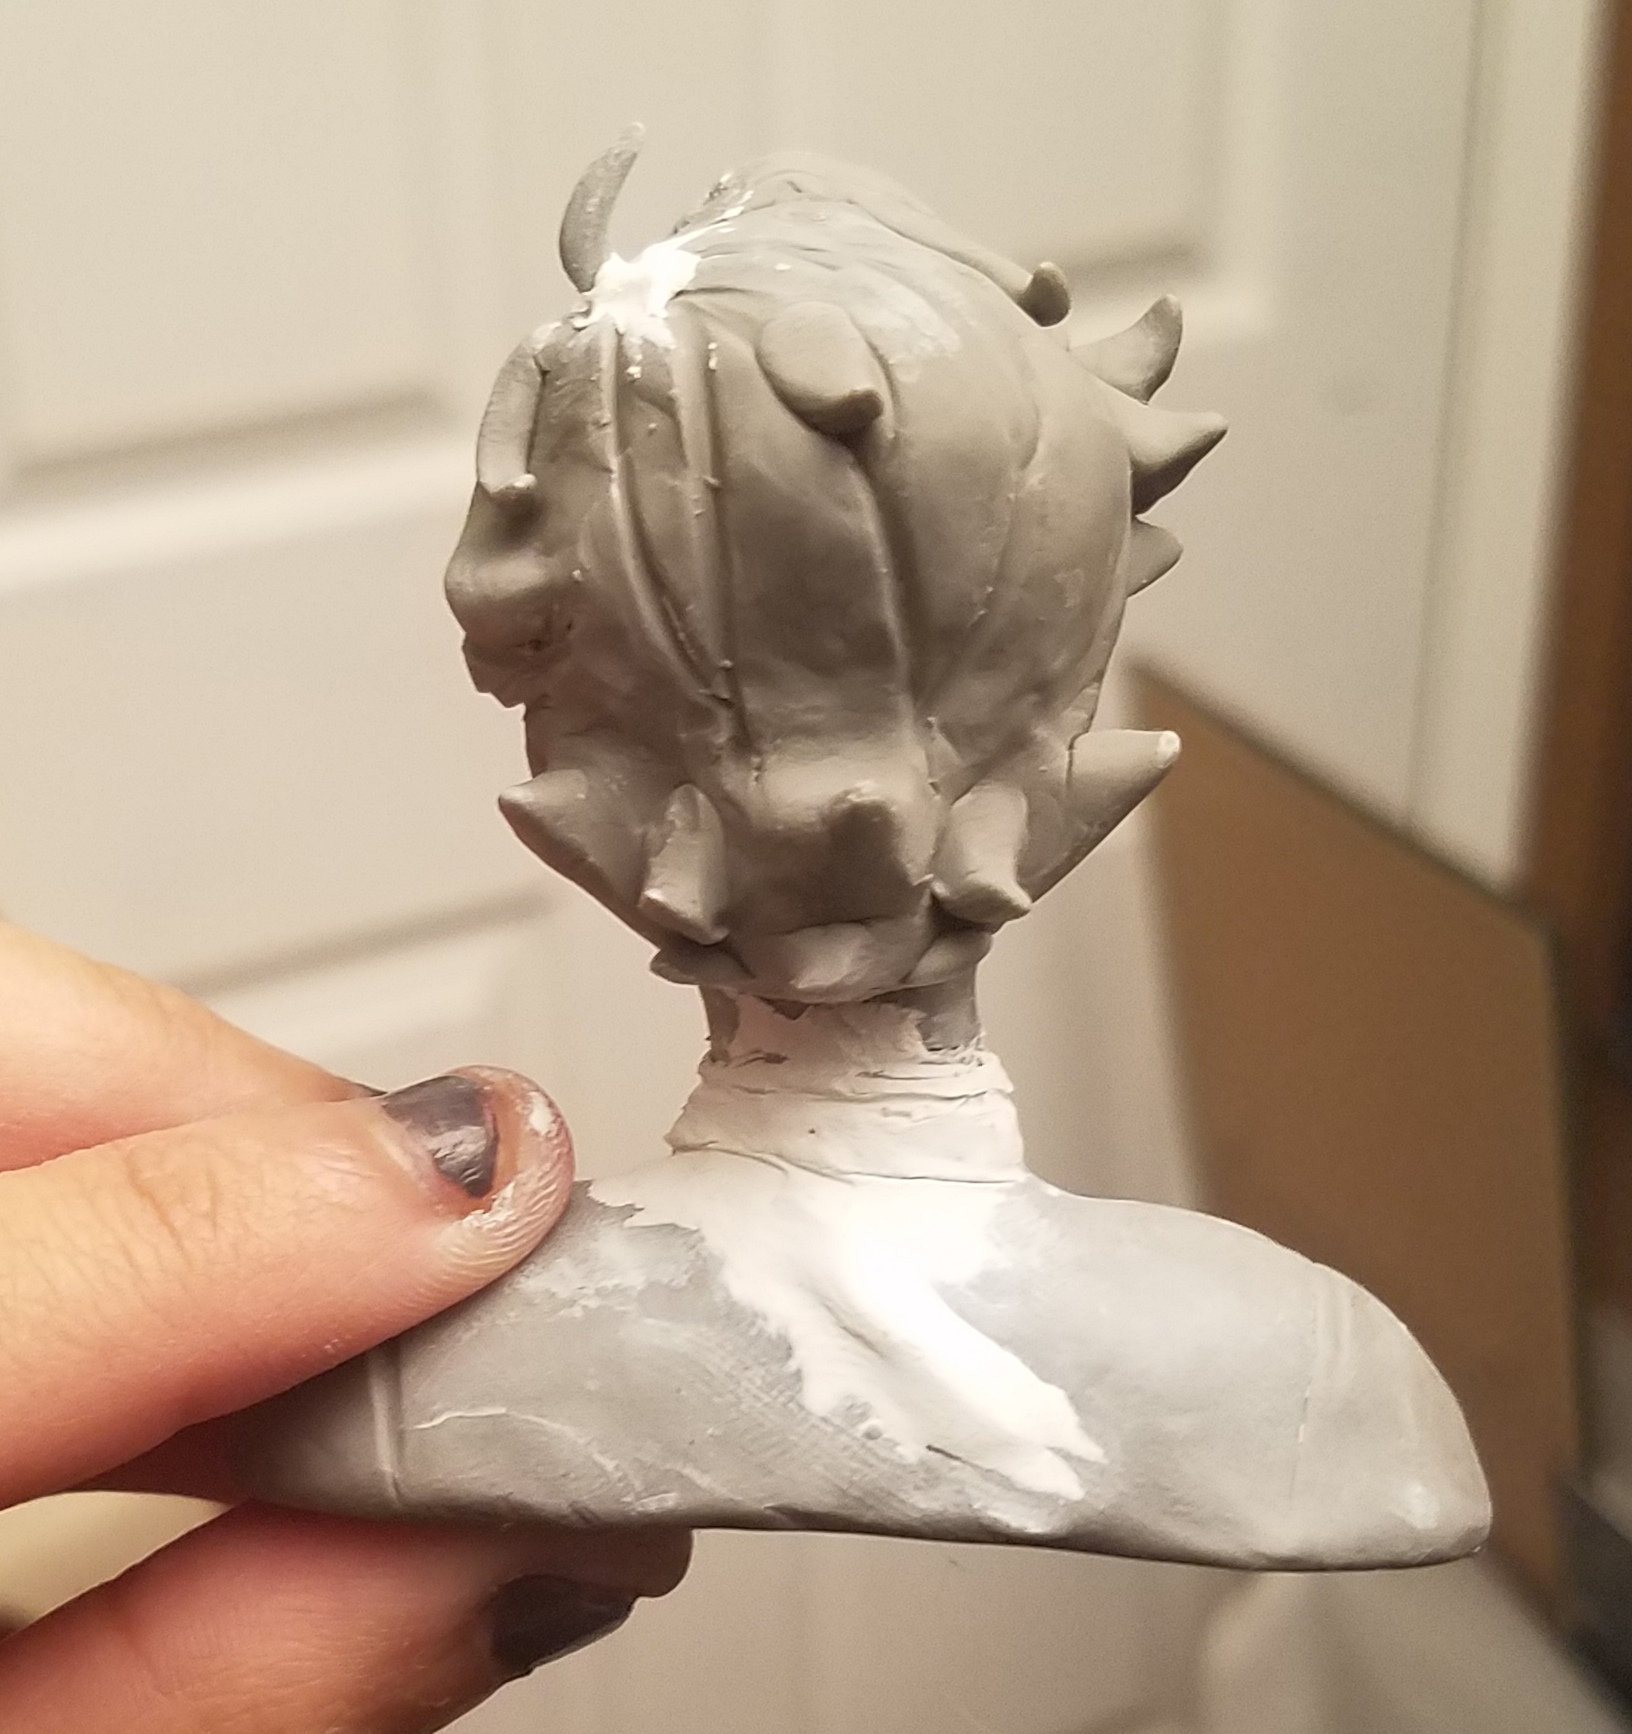 Back view of the Dante bust. In progress sculpting.